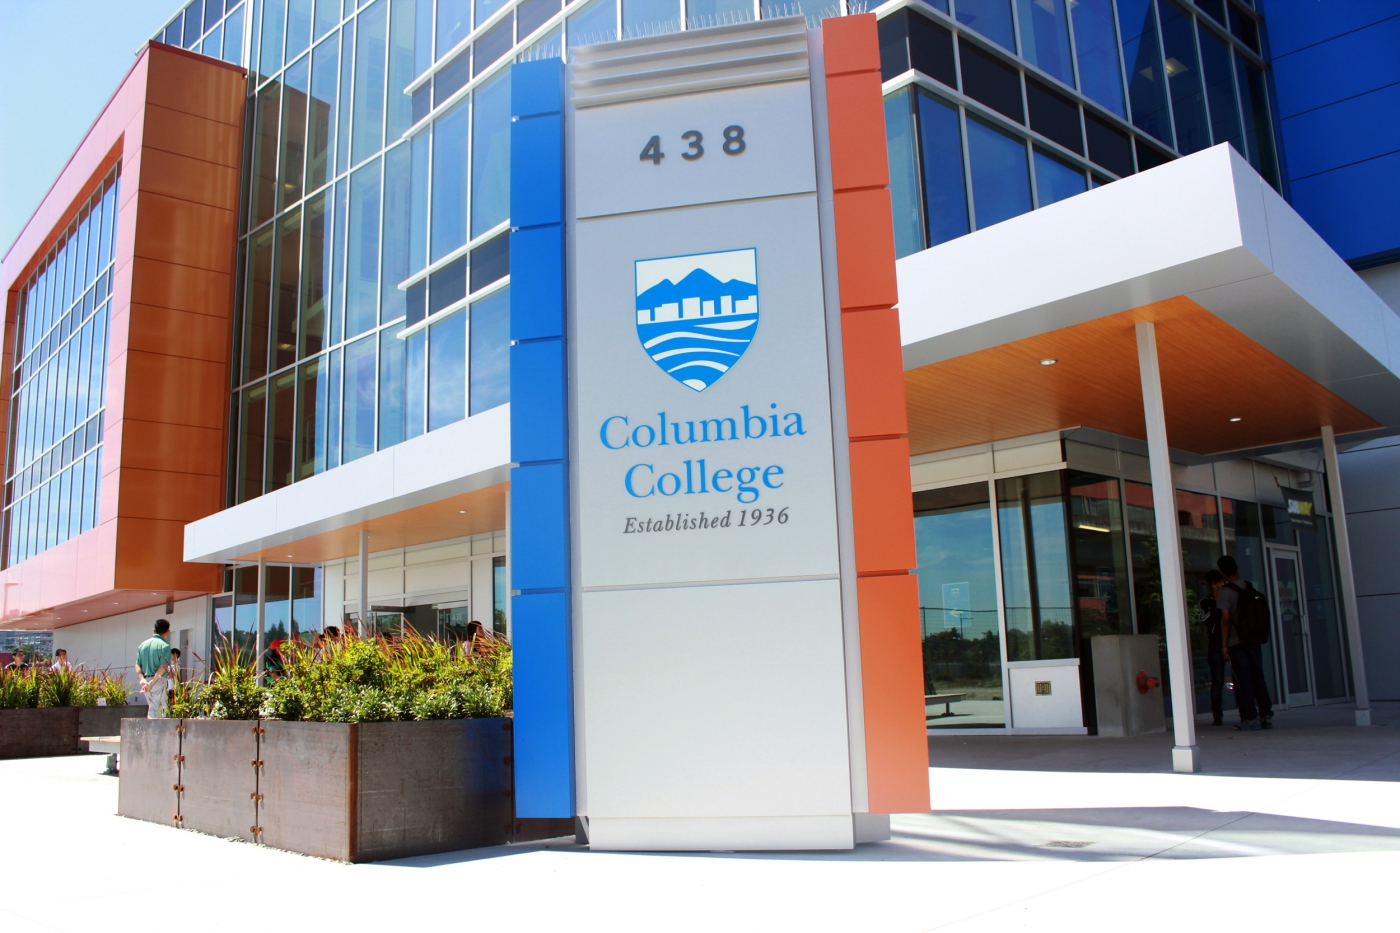 About Columbia College